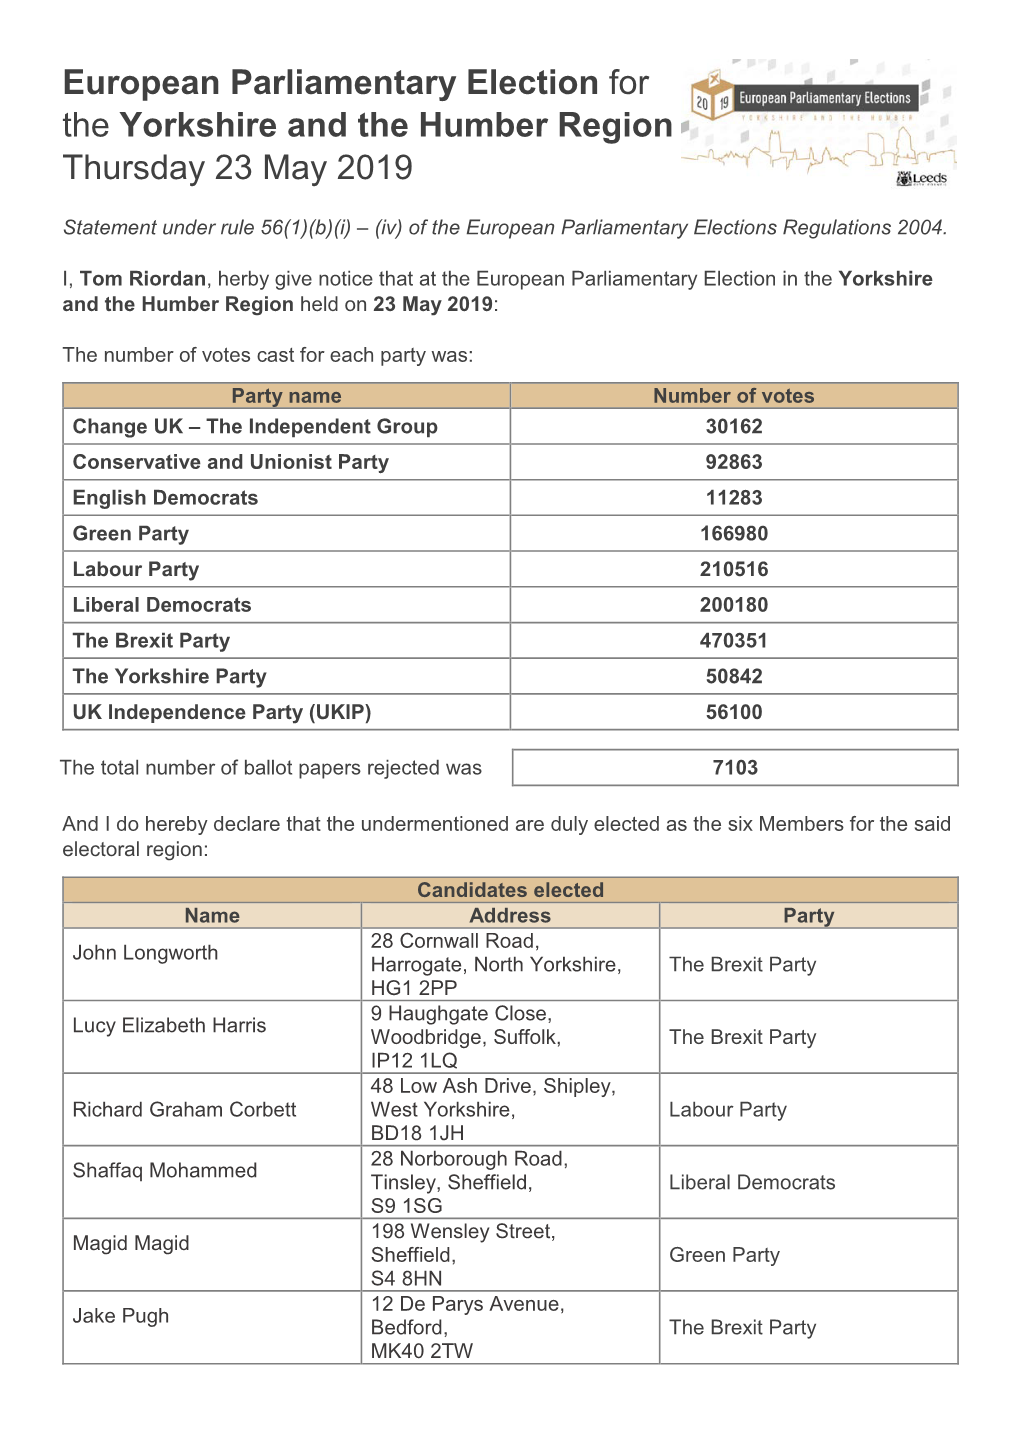 European Parliamentary Election for the Yorkshire and the Humber Region Thursday 23 May 2019